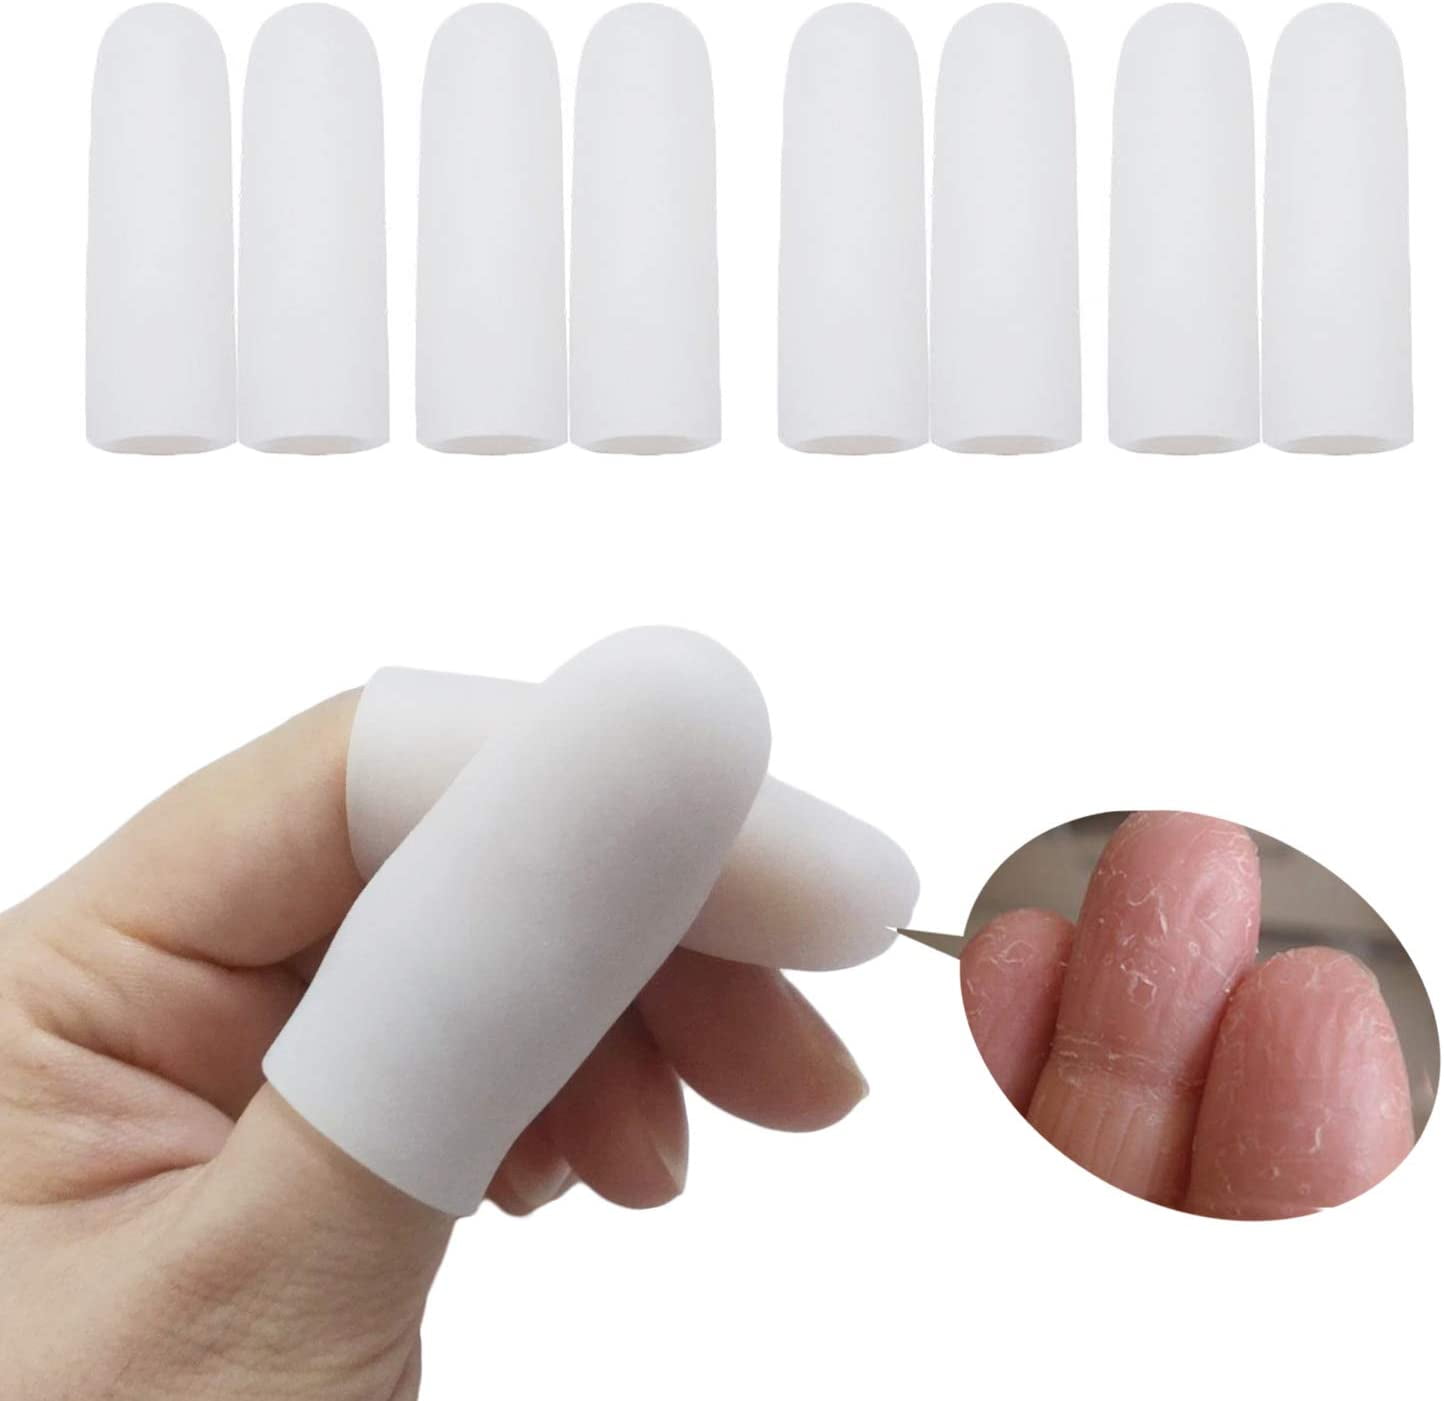 6 PCS Silicone Finger Protectors, Finger Cots, Premium Fingertip Cover  guards pads for Hot Glue Gun, Knitting Craft Sewing Embroidery Ironing  Rosin